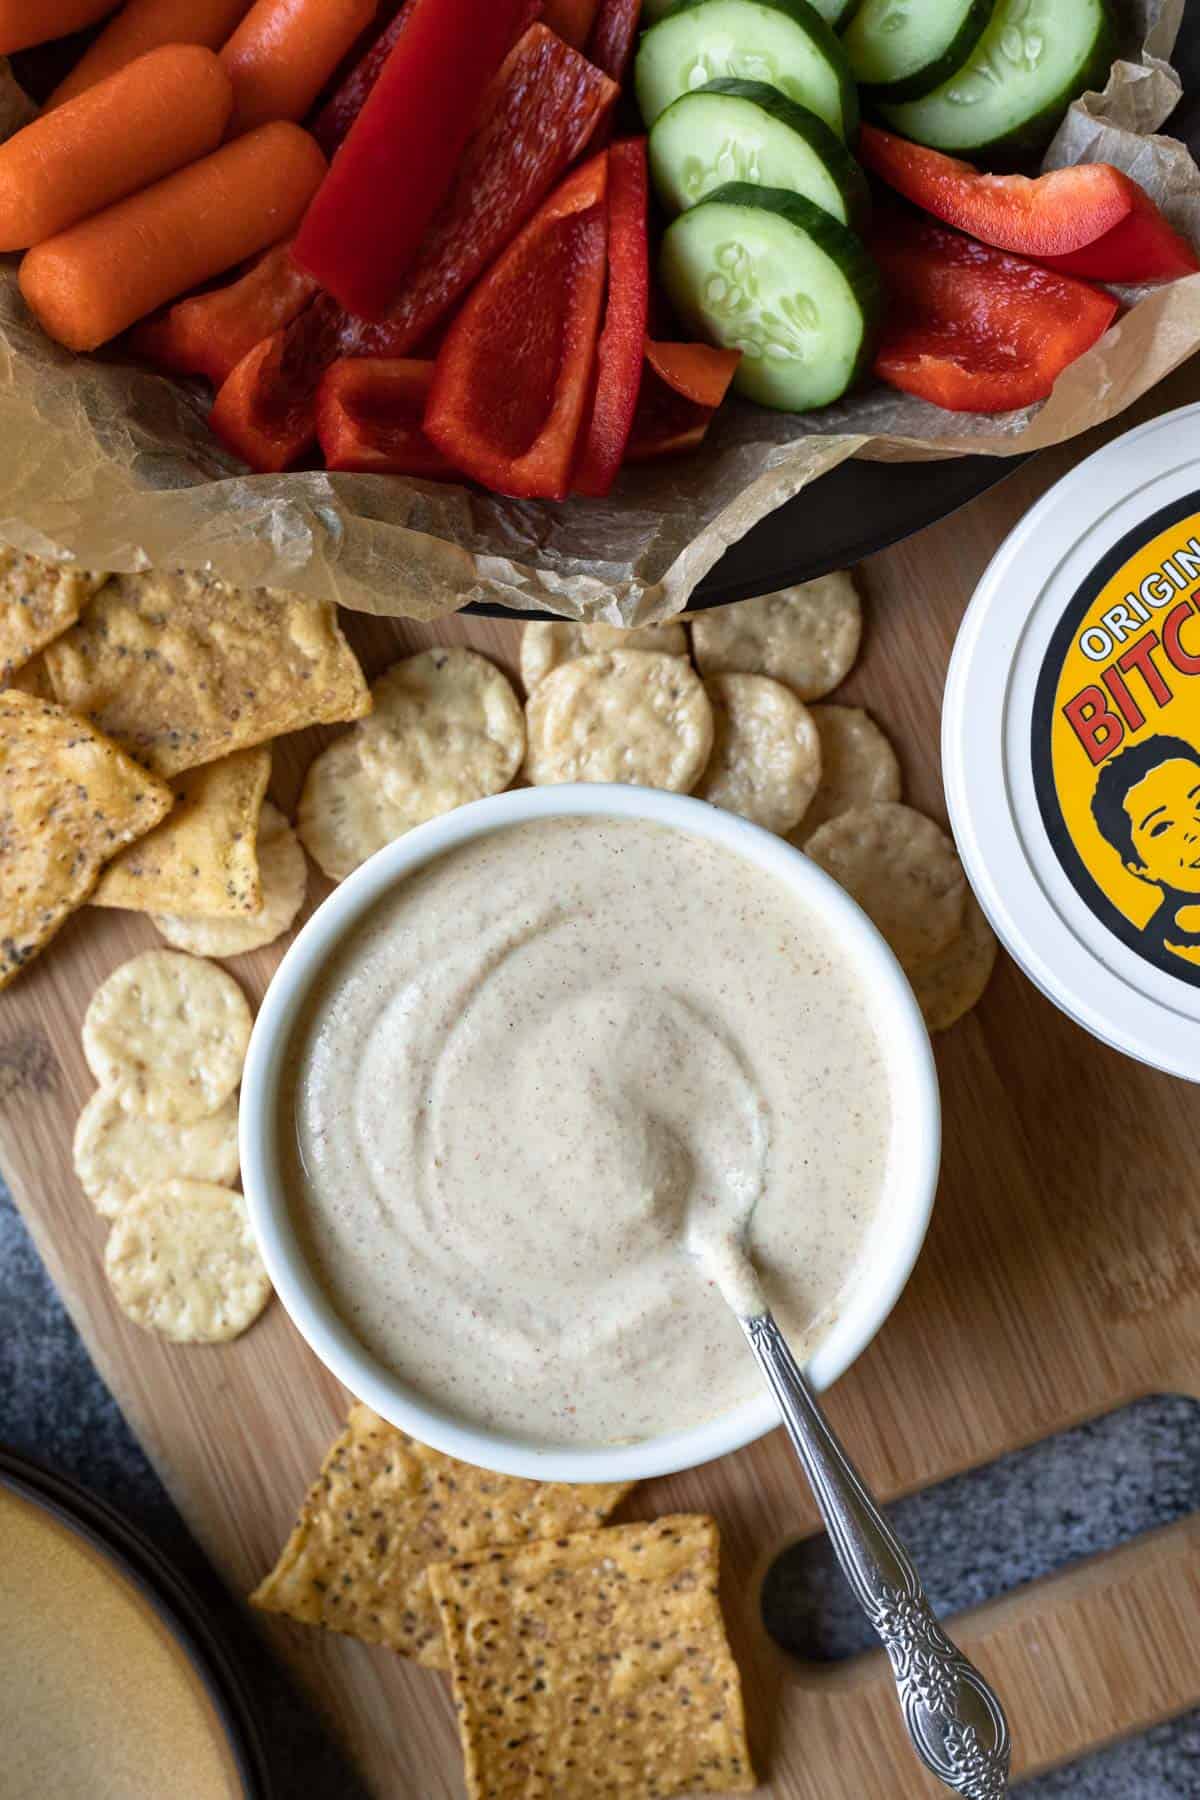 Make your own Bitchin' Sauce at home in minutes with just 8 ingredients. This flavorful vegan almond sauce is rich, creamy, cheesy, garlicky and tastes amazing on pretty much everything! And this version is oil-free (WFPB). Dips for charcuterie boards.